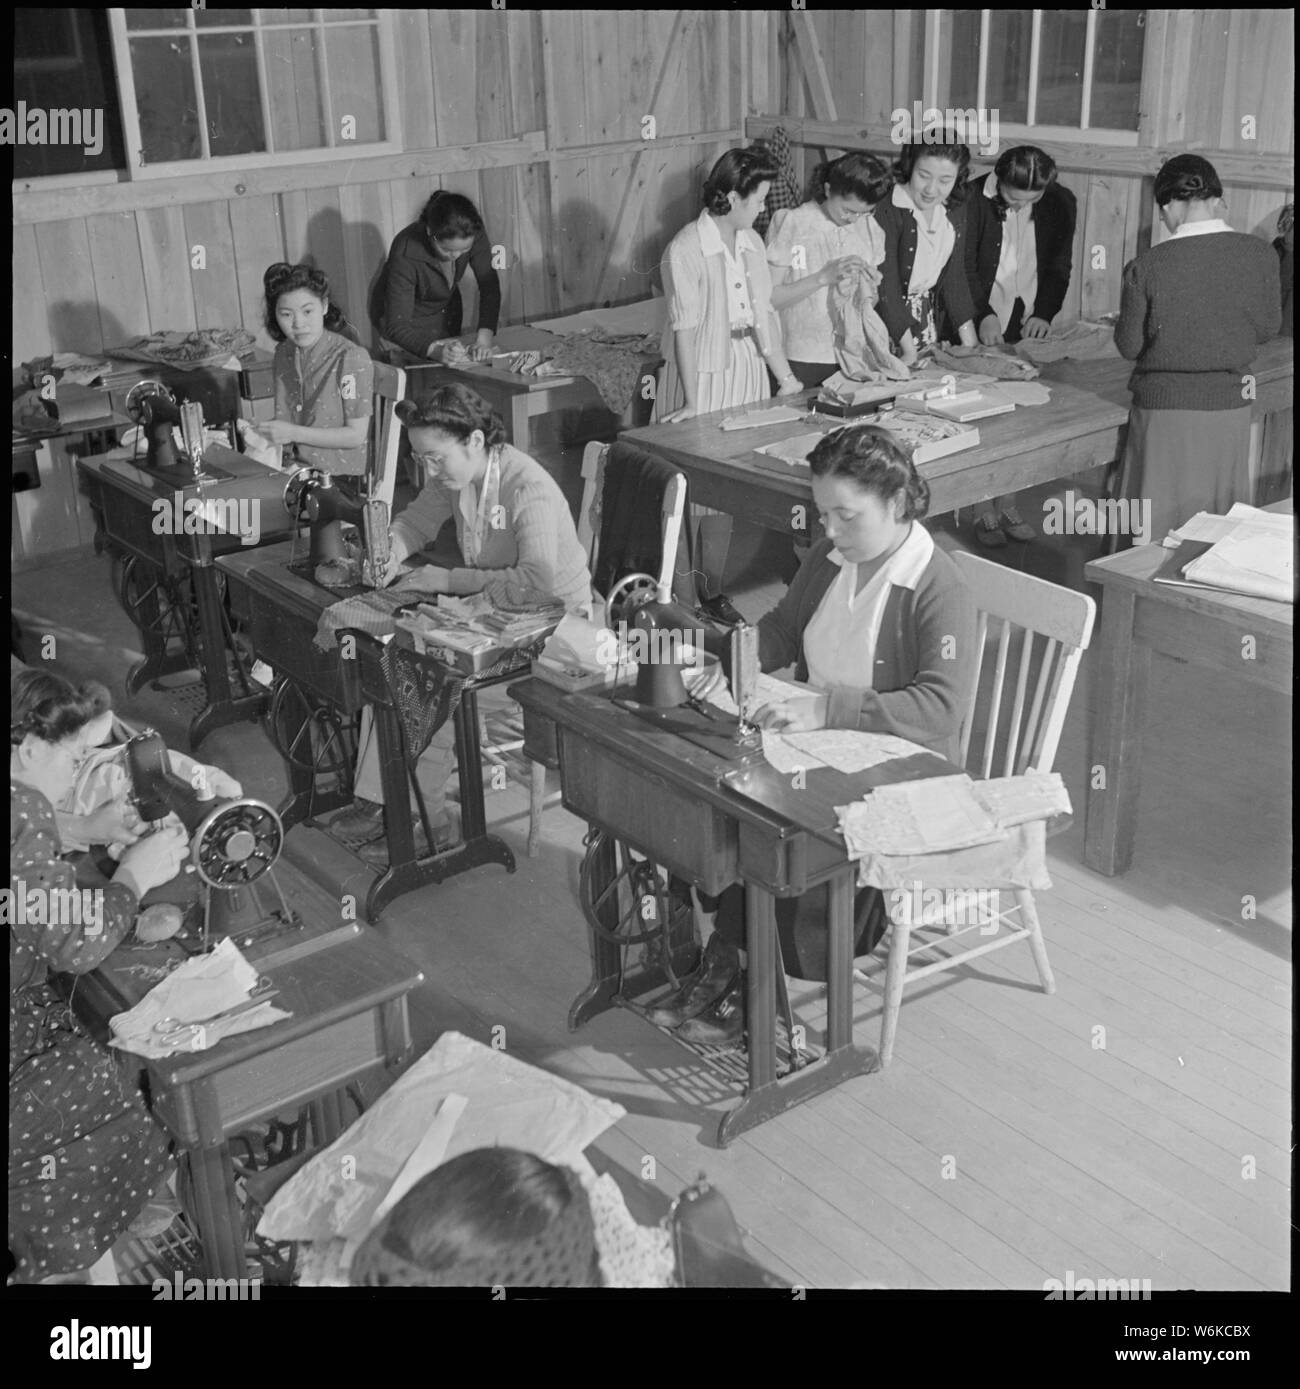 Rohwer Relocation Center, McGehee, Arkansas. A sewing class in the adult education division of the . . .; Scope and content:  The full caption for this photograph reads: Rohwer Relocation Center, McGehee, Arkansas. A sewing class in the adult education division of the Rohwer schools. This class is conducted by center residents, Mrs. Sadako Yasue, a qualified Home Economics Teacher, who, with other assistant teachers, have been recruited from among center residents, former west coast persons of Japanese ancestry. Stock Photo